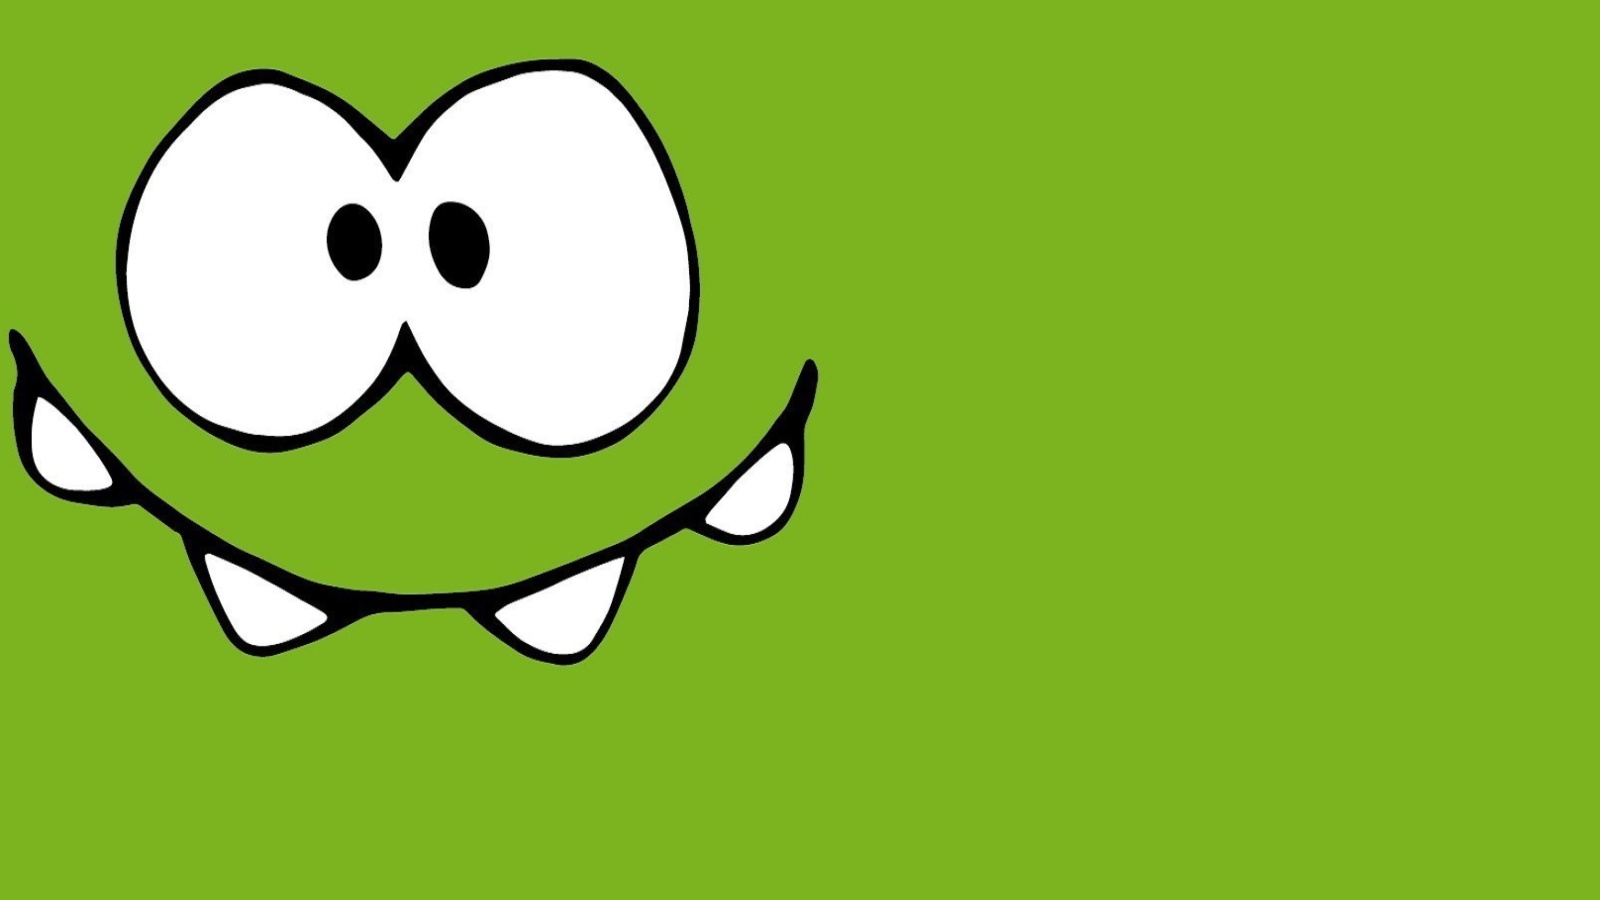 Om Nom from game Cut the Rope wallpaper 1600x900